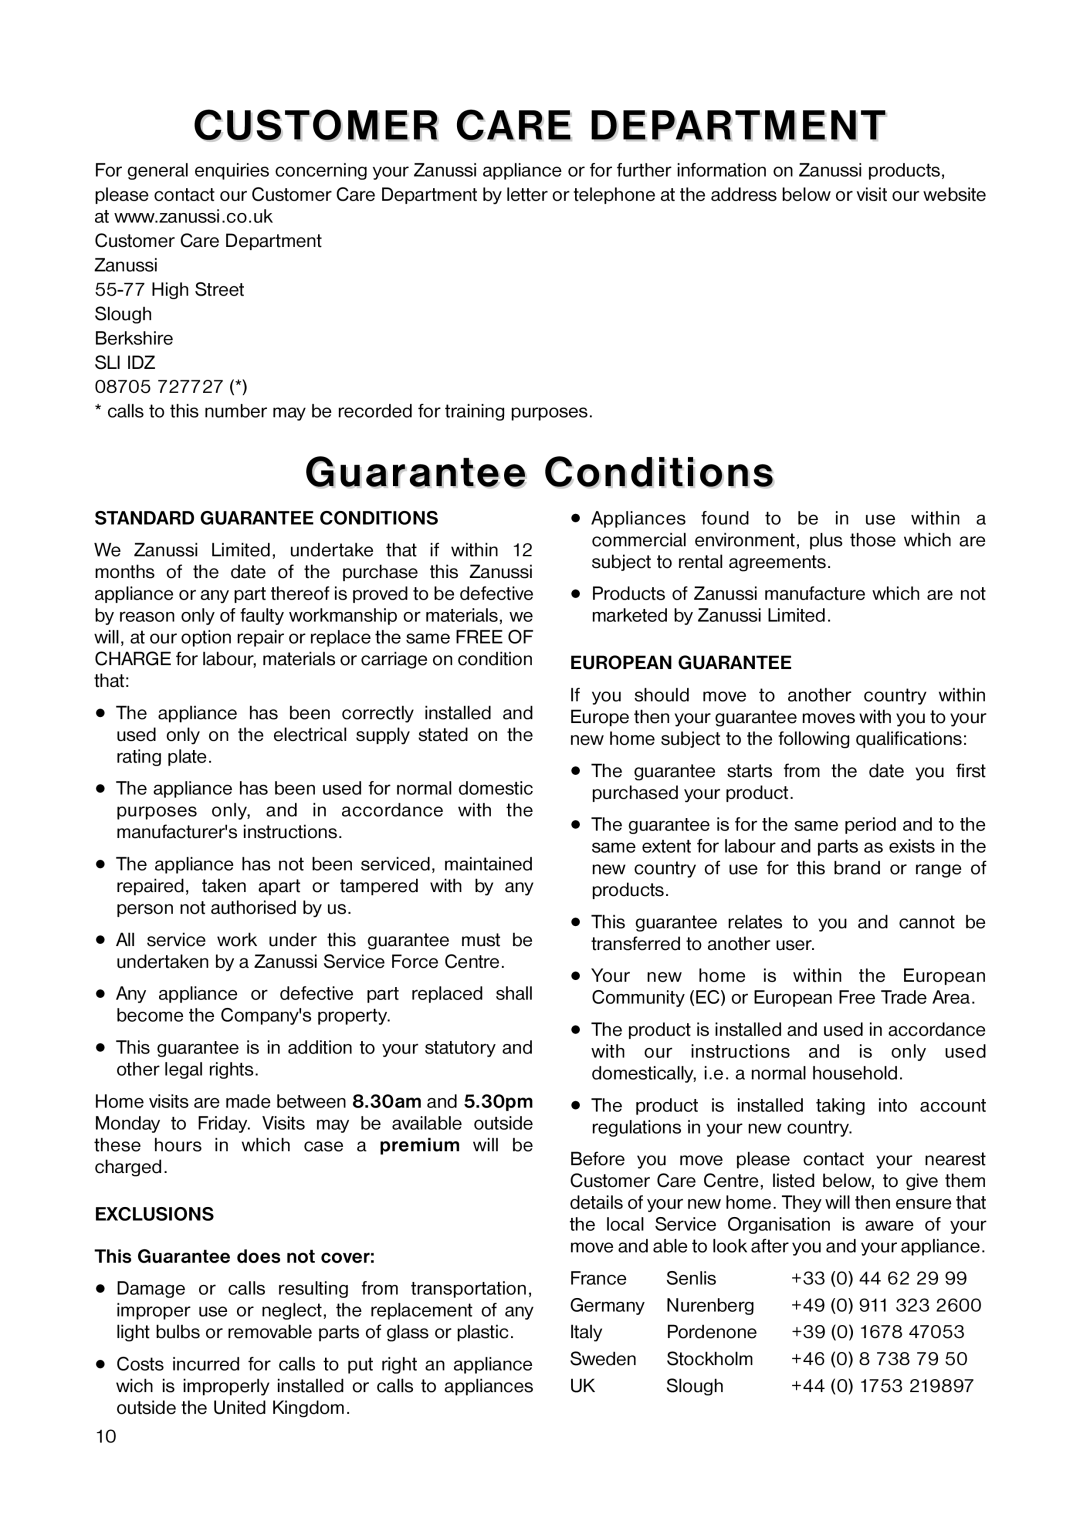 Zanussi ZT 25 manual Customer Care Department, Standard Guarantee Conditions, EXCLUSIONS This Guarantee does not cover 